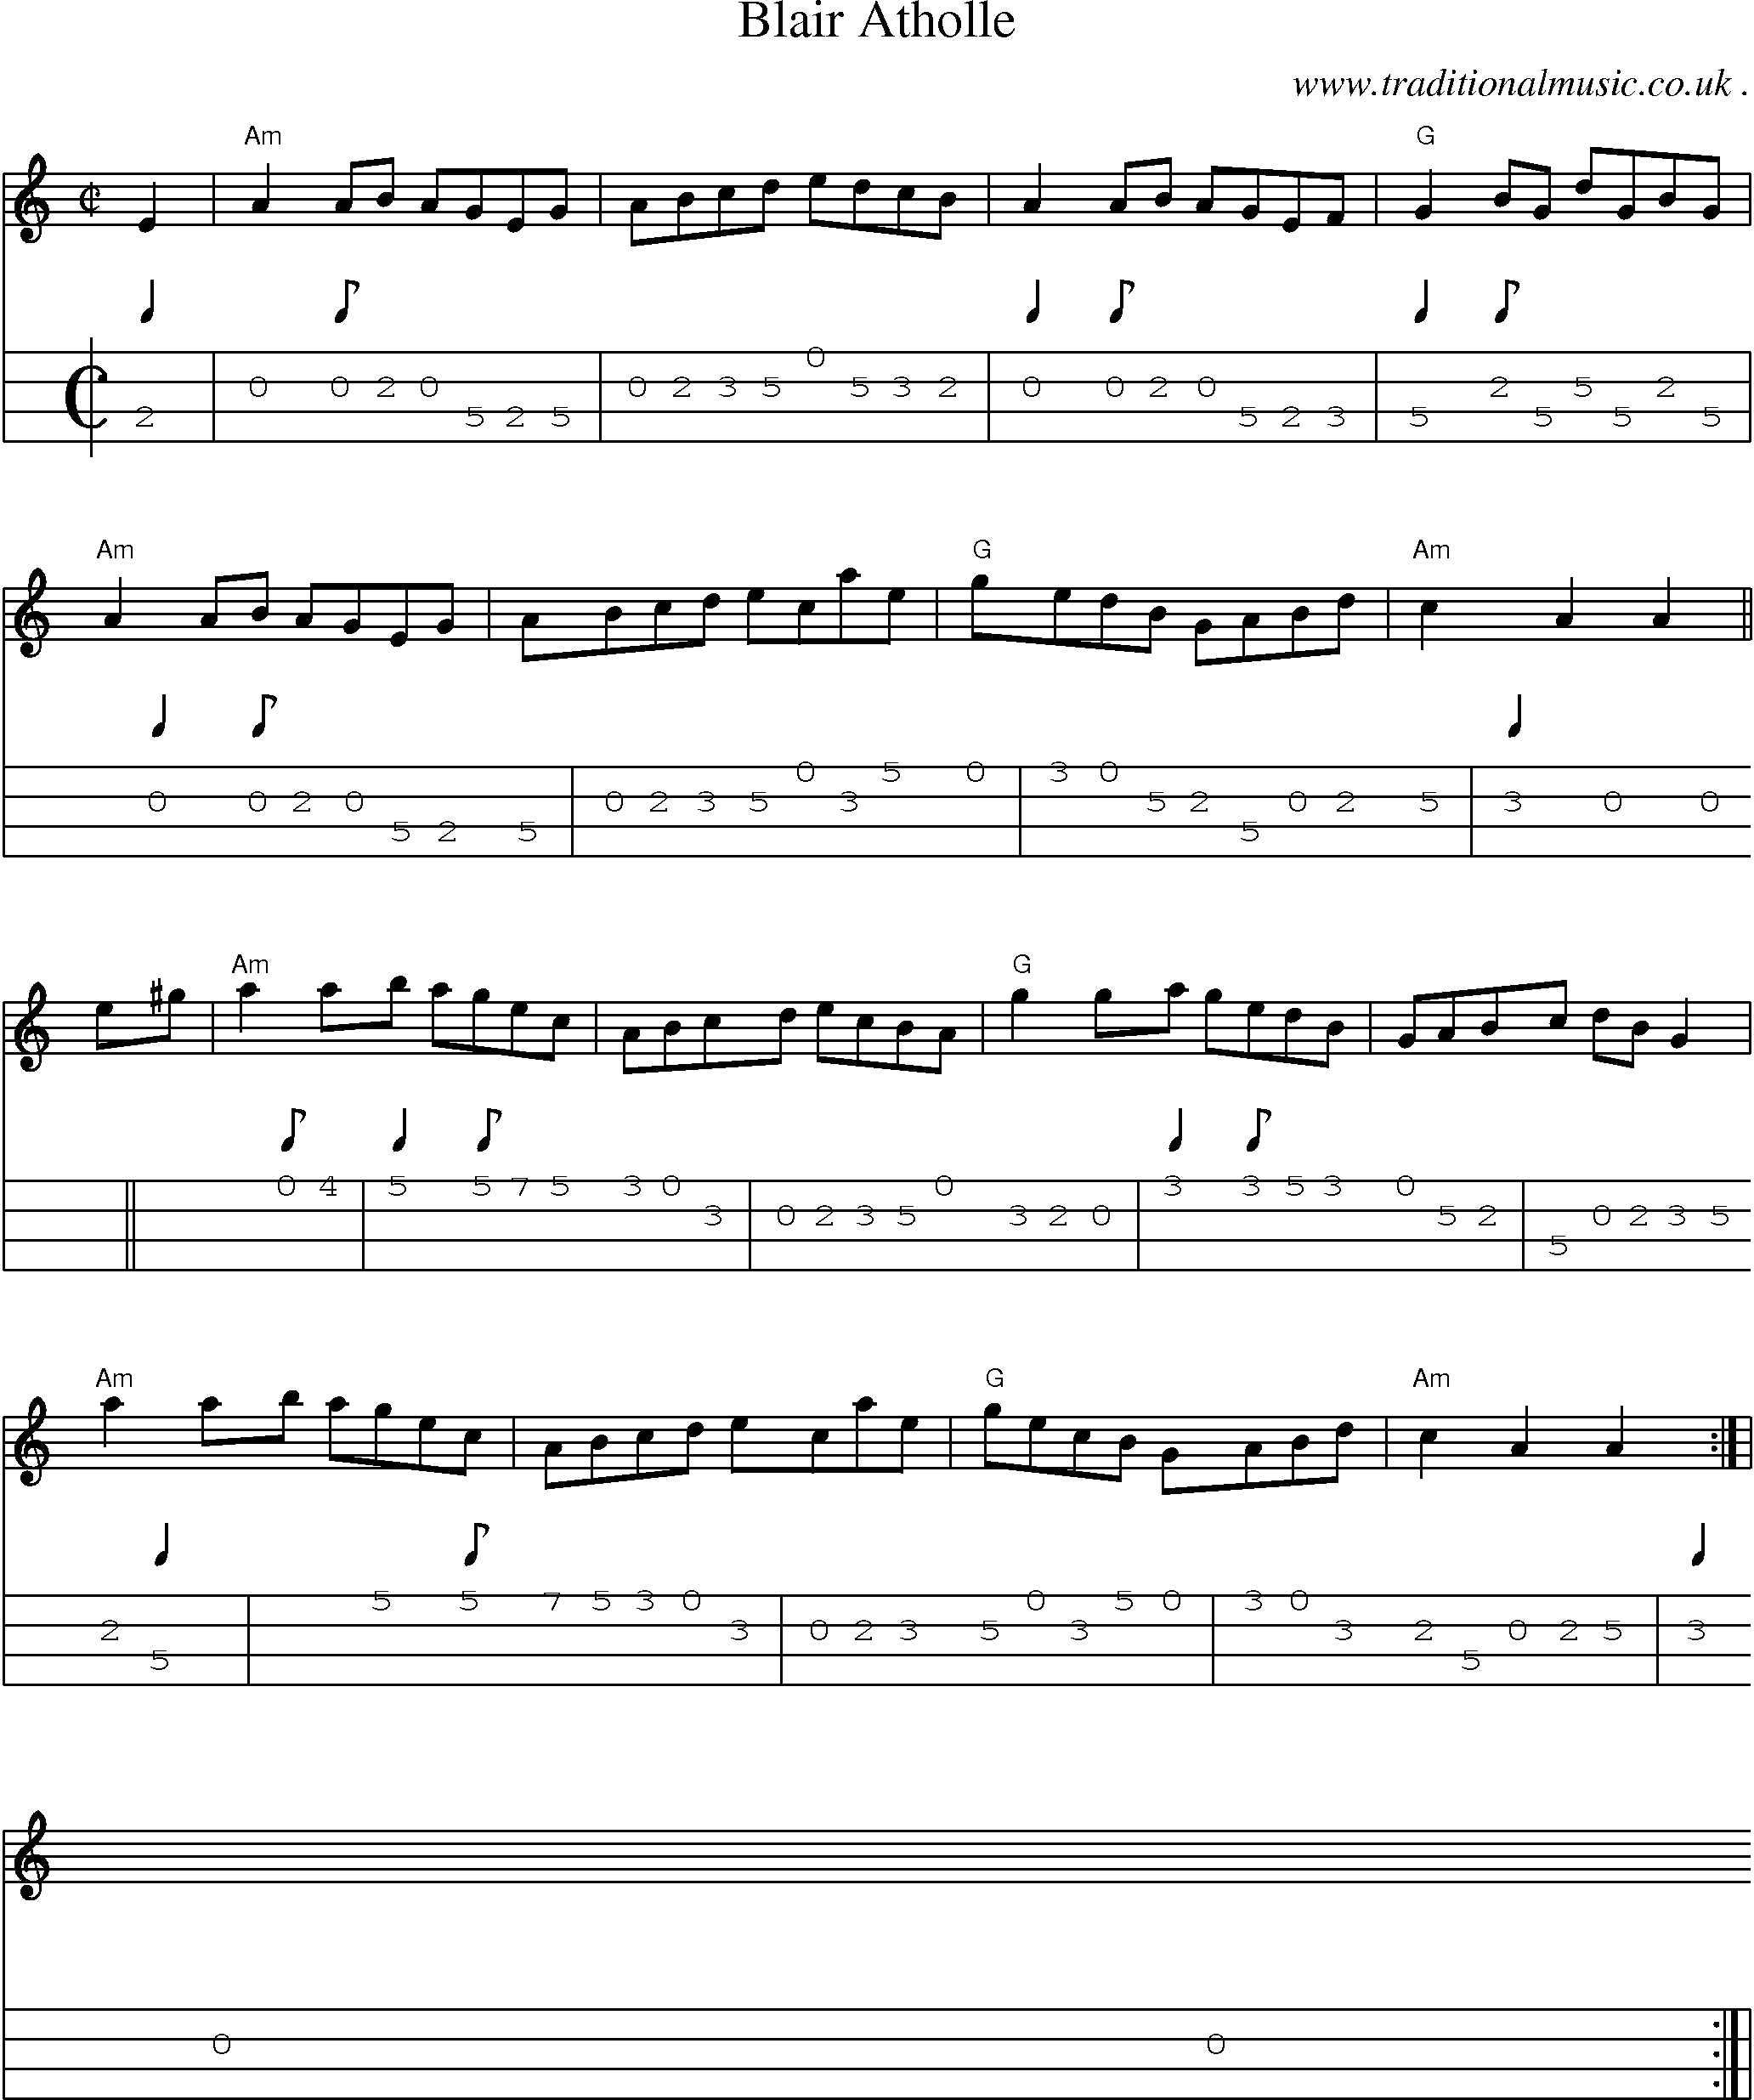 Sheet-music  score, Chords and Mandolin Tabs for Blair Atholle